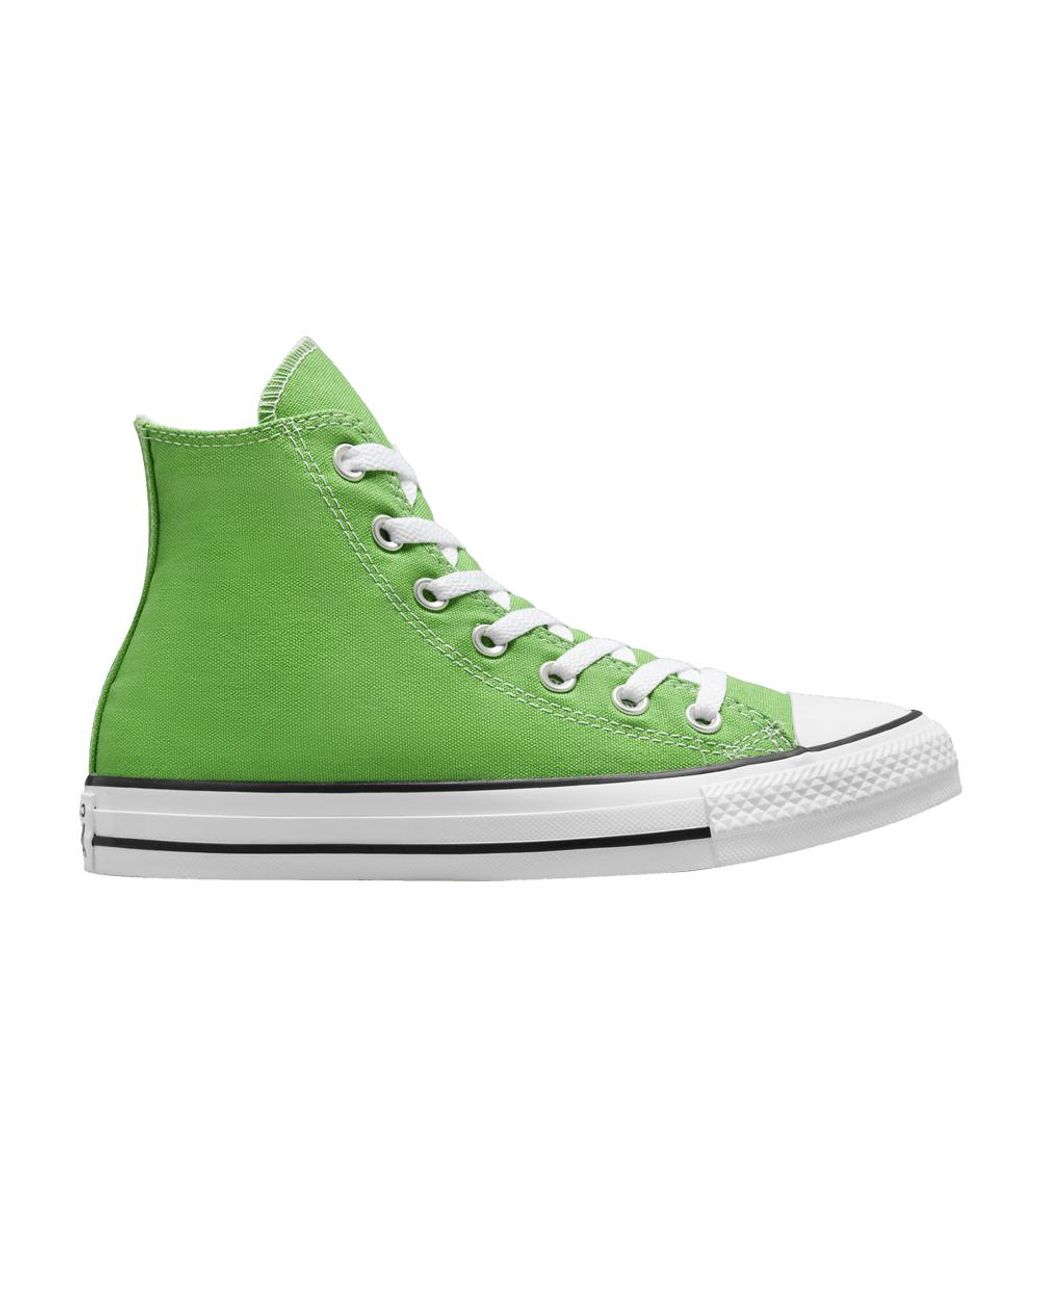 Discover 100+ images converse chuck taylor all star verde - In ...